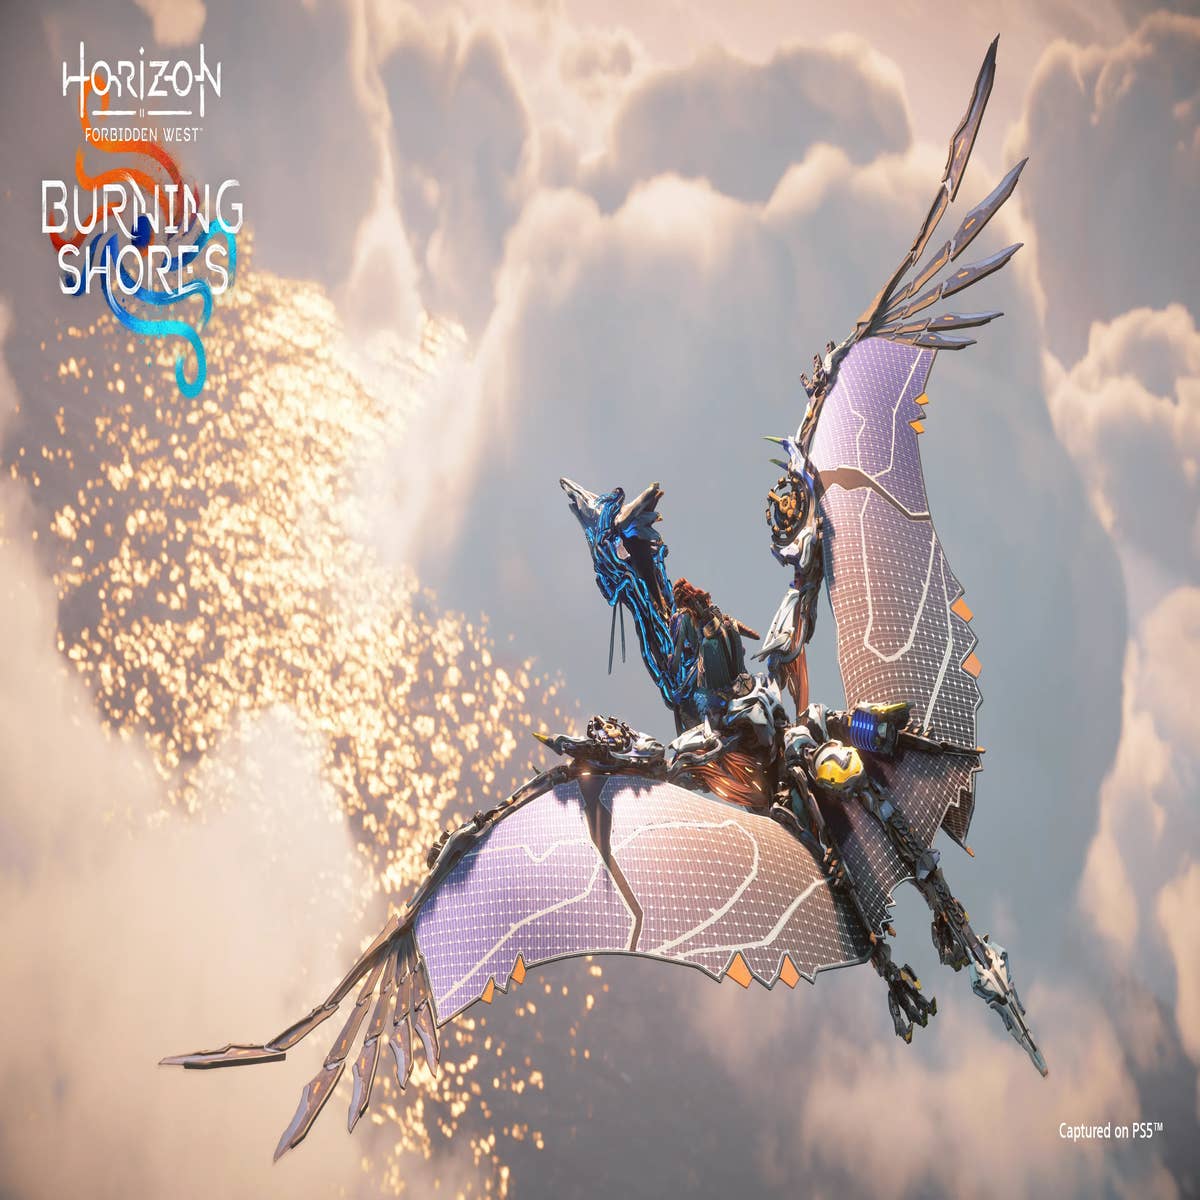 Horizon Forbidden West Burning Shores Gets Review-Bombed, But